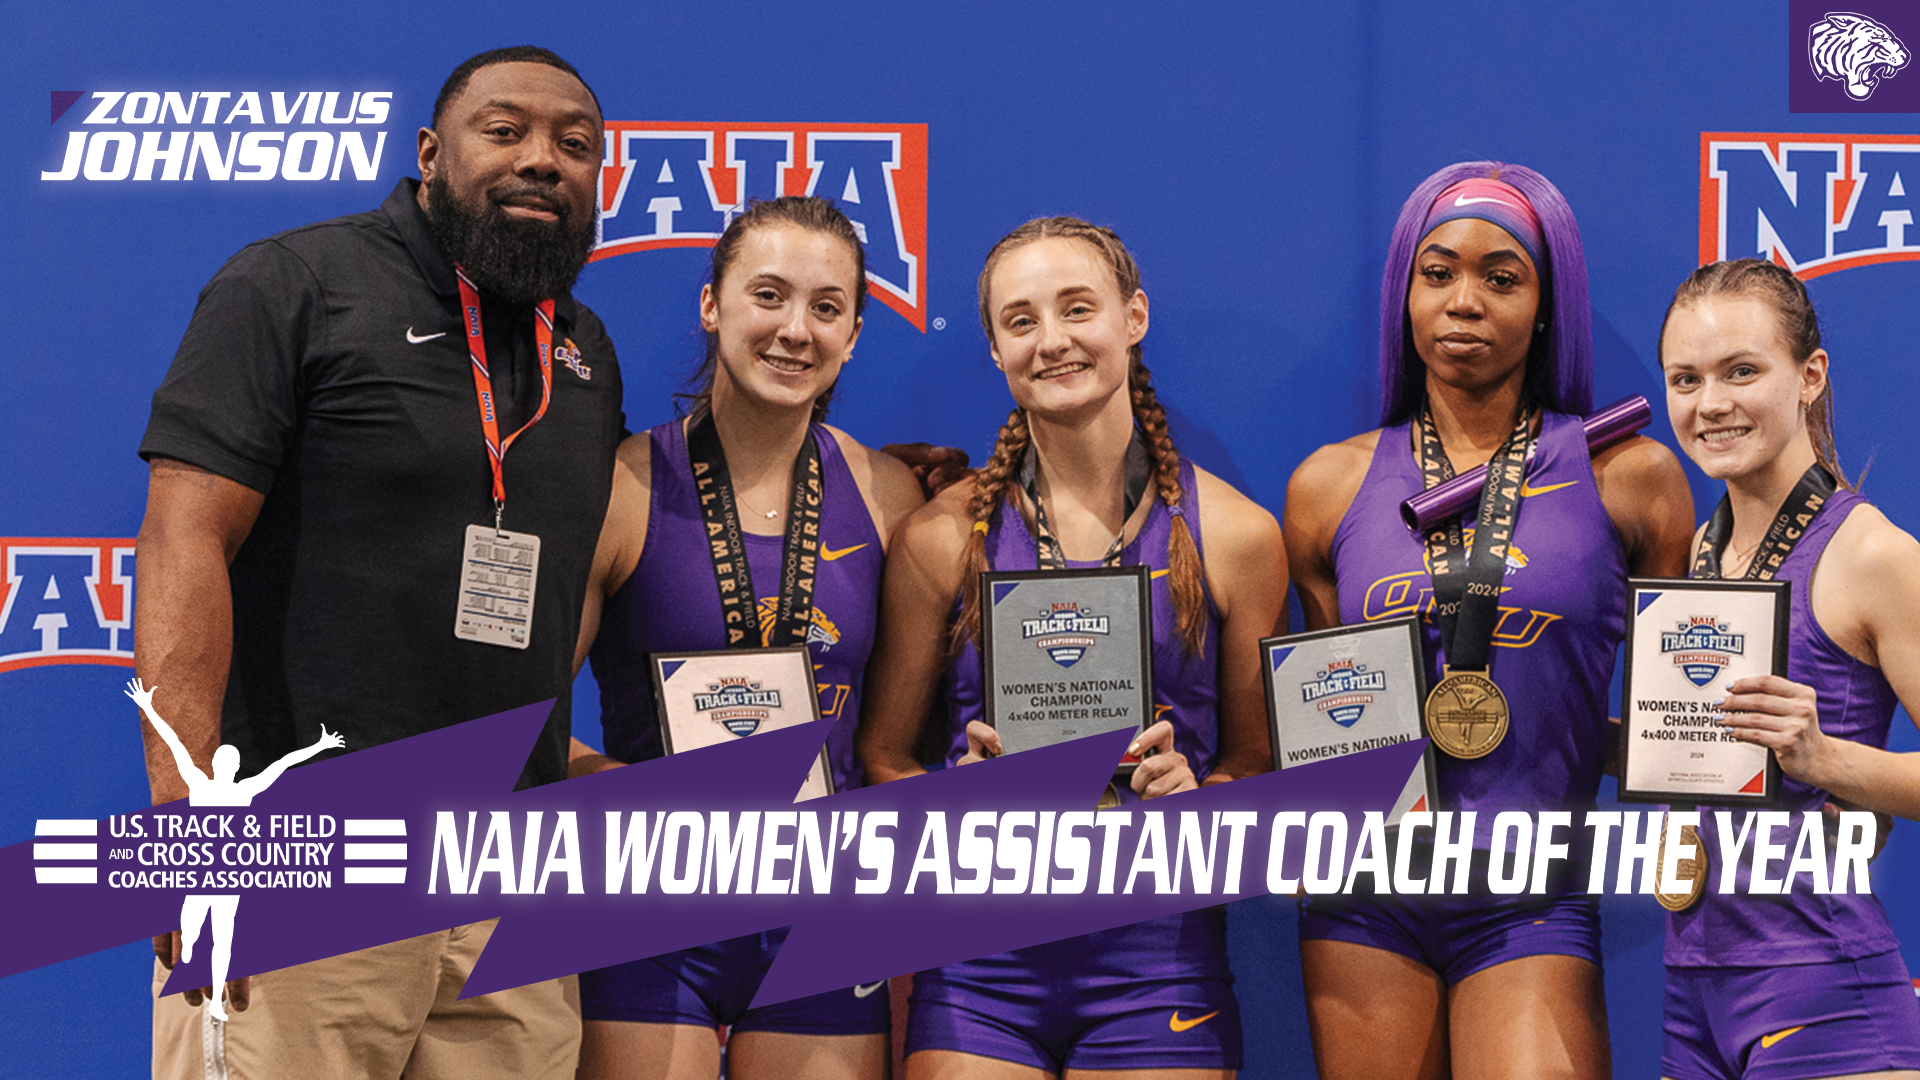 ZONTAVIUS JOHNSON NAMED NAIA WOMEN’S ASSISTANT COACH OF THE YEAR